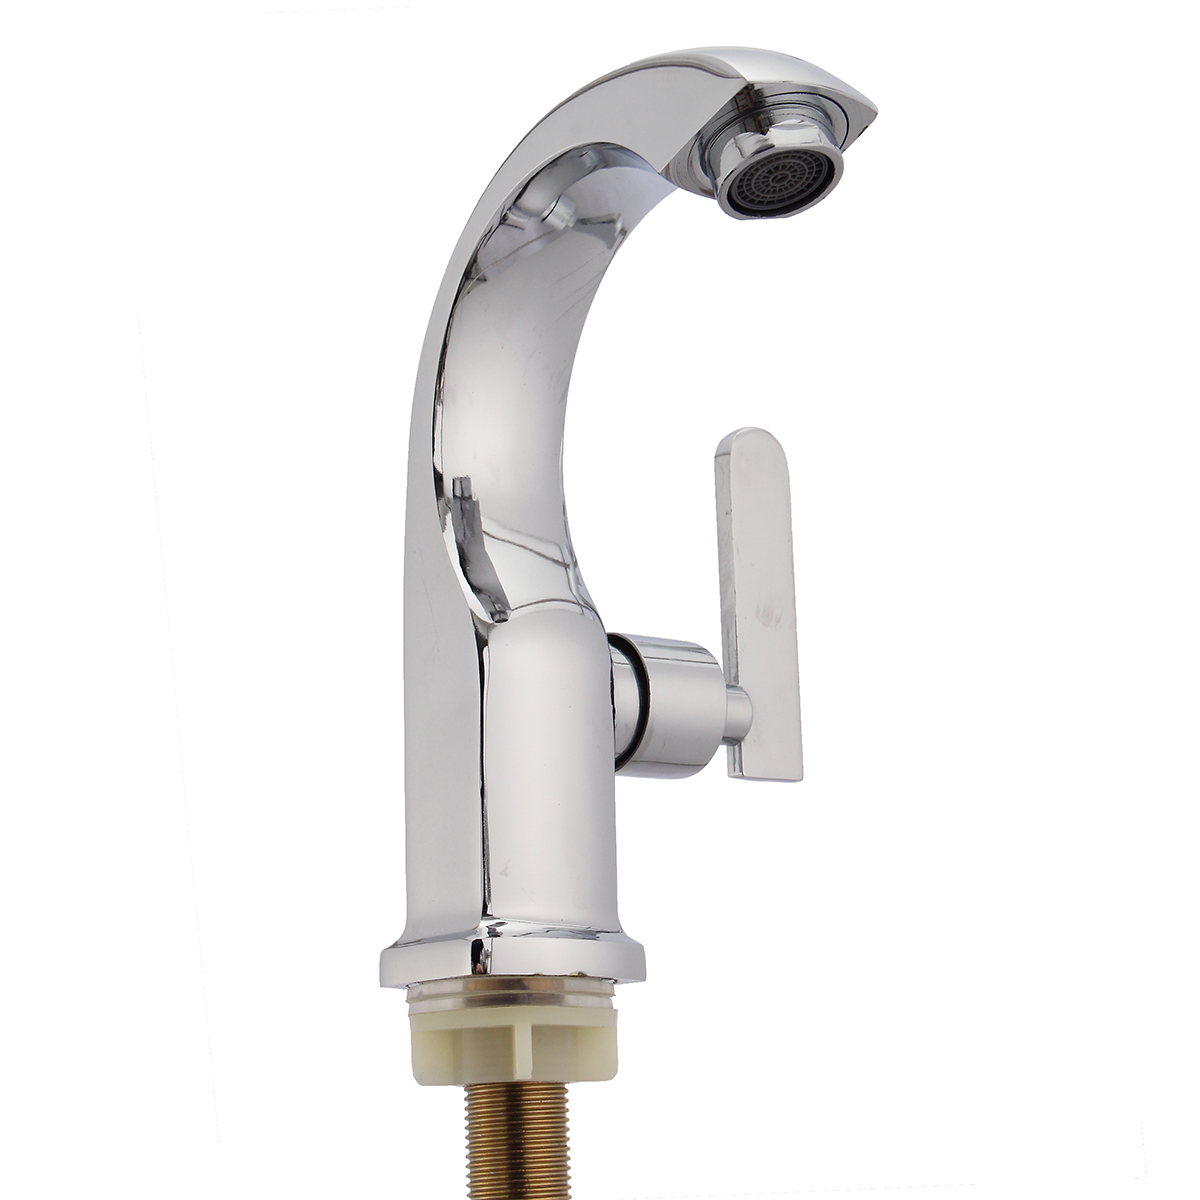 Chrome-Finish-Single-Lever-Home-Bathroom-Basin-Faucet-Spout-Sink-Cold-Water-Tap-1298560